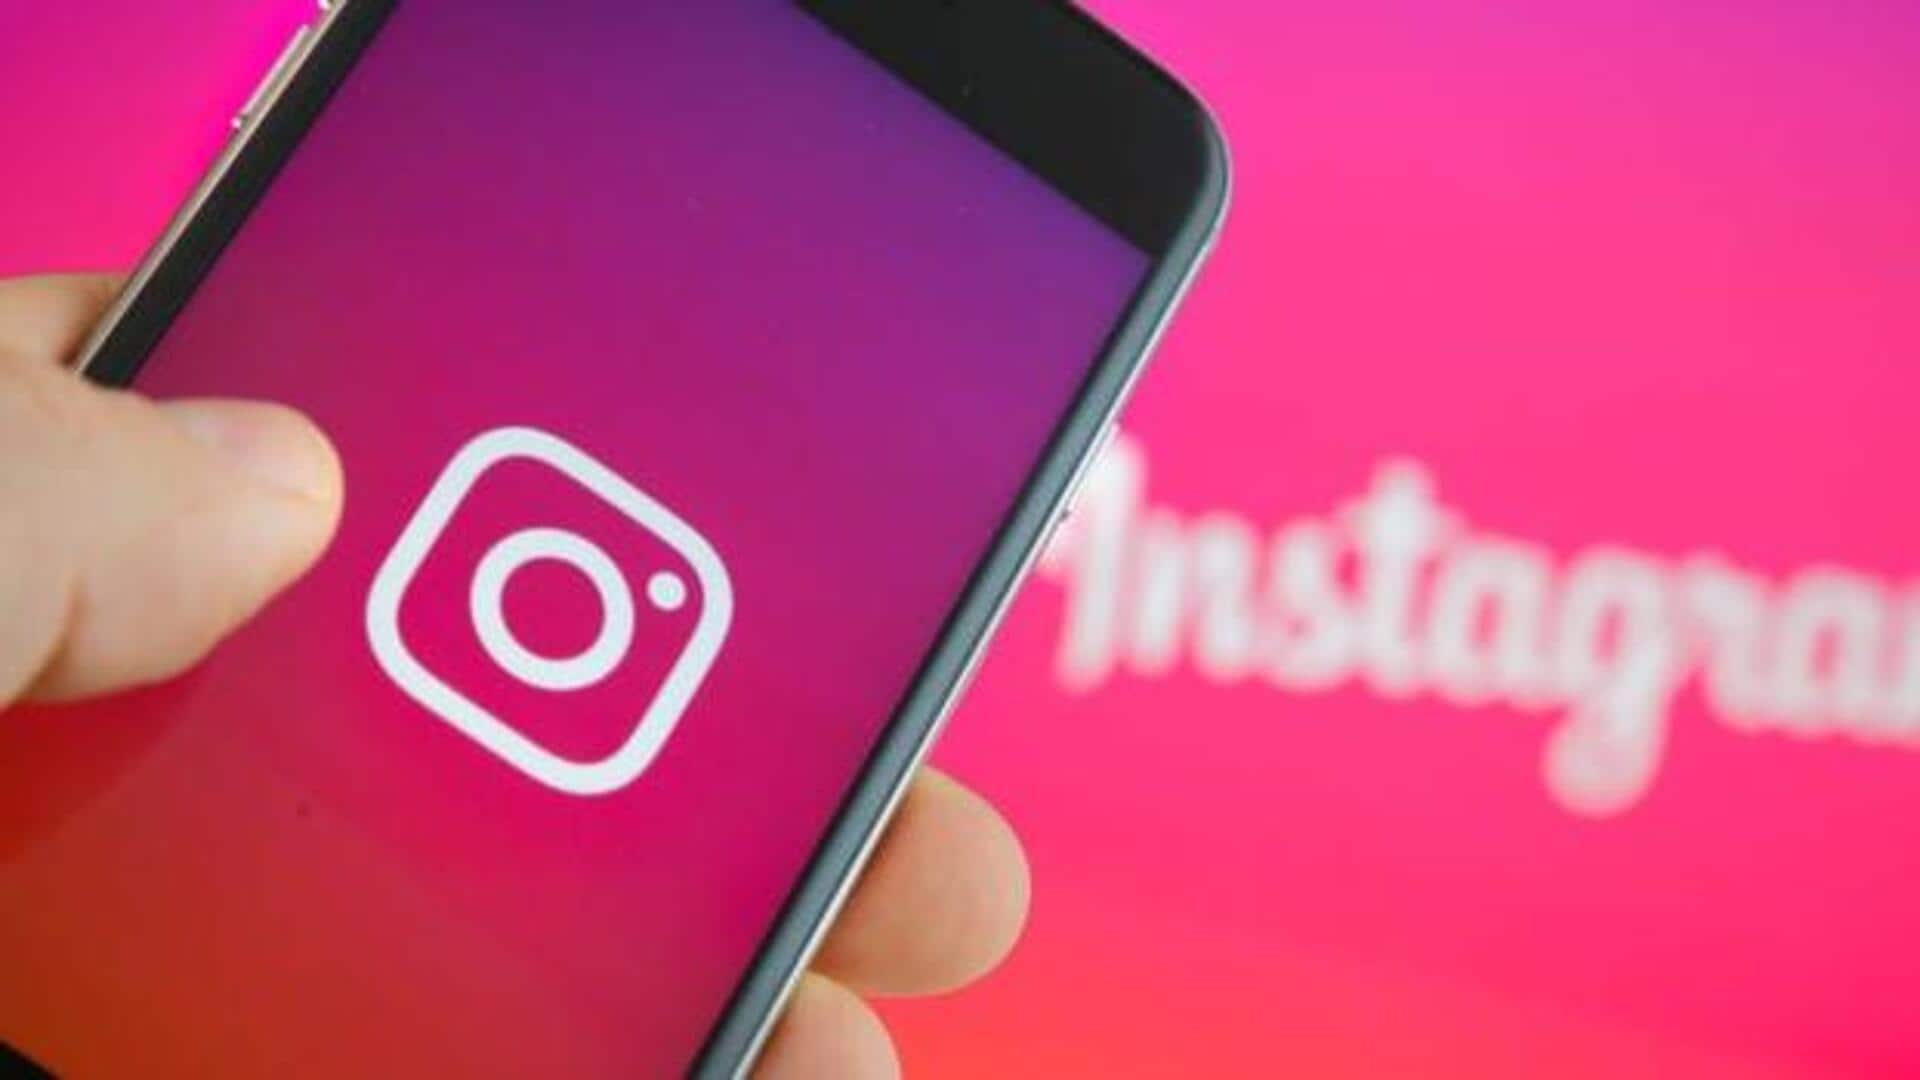 Instagram tests unskippable ads, draws criticism from users